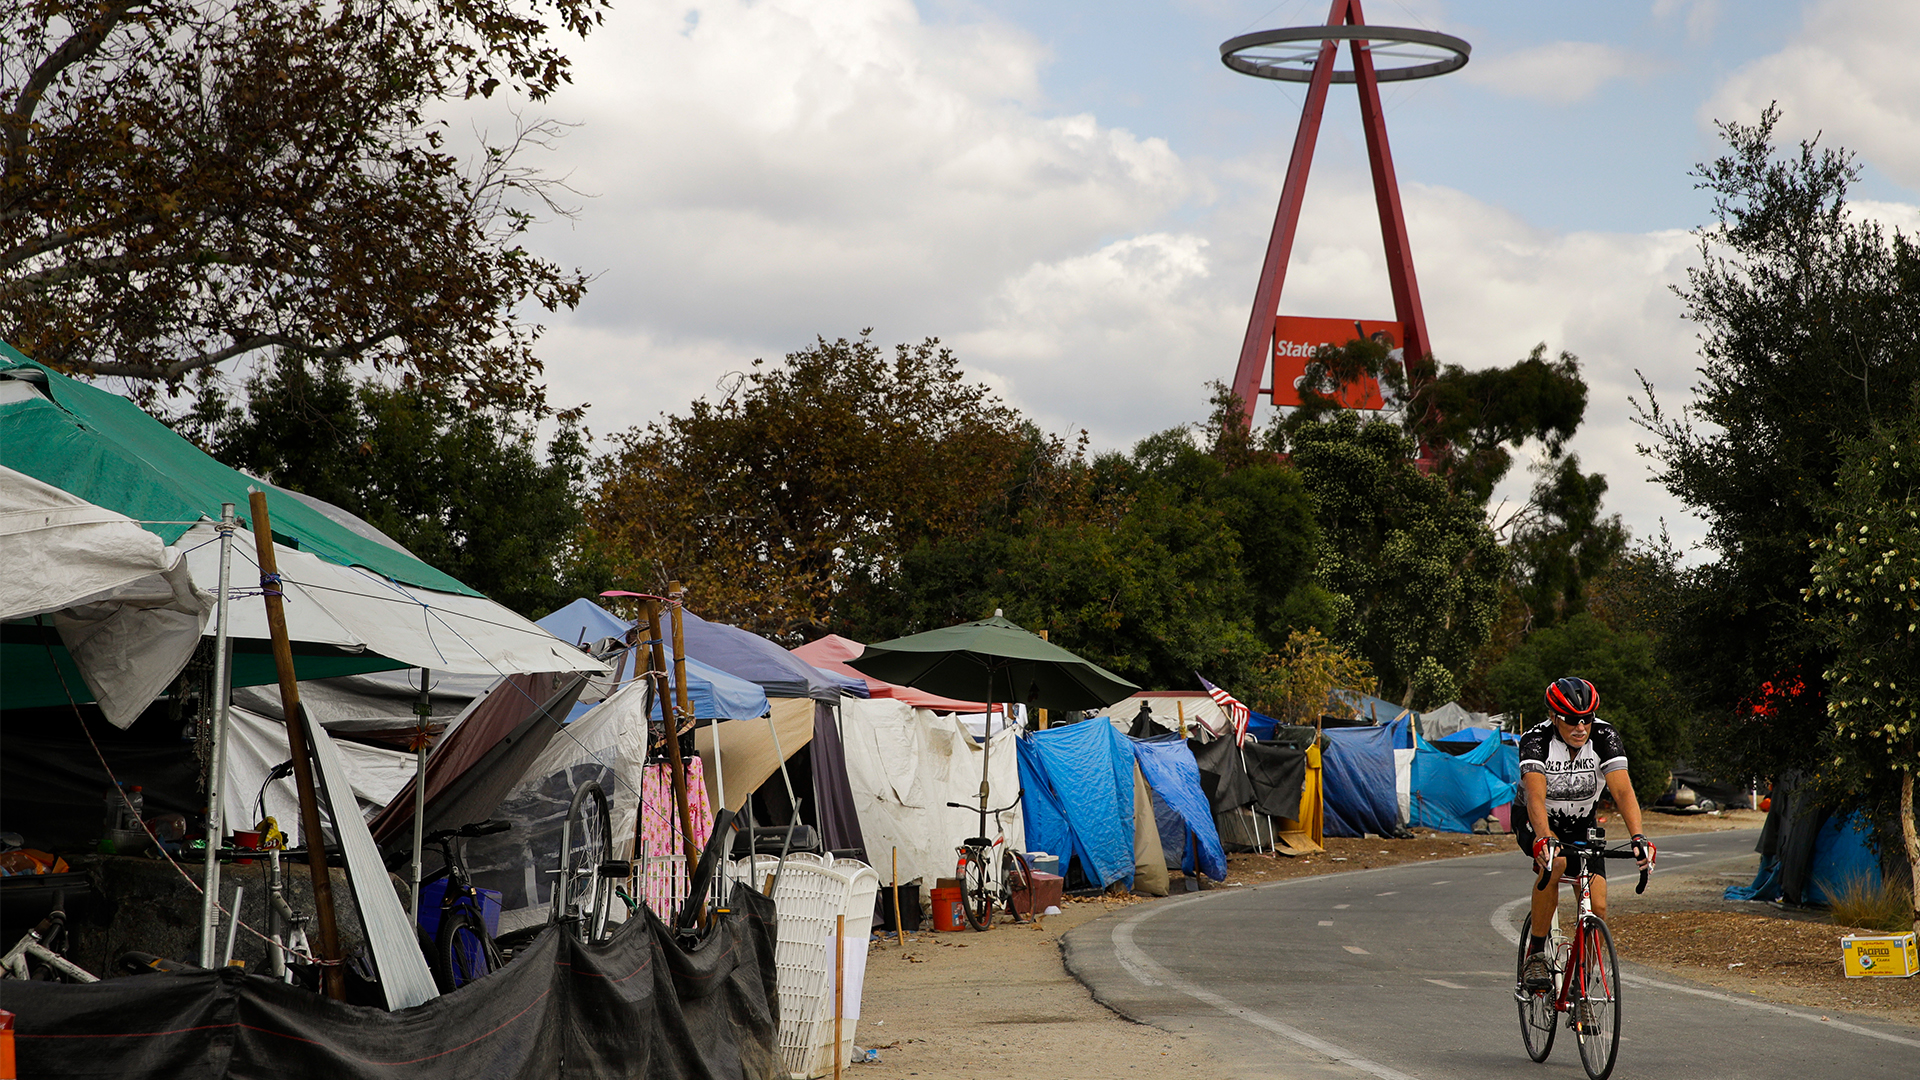 n this Sept. 14, 2017 file photo a cyclist passes the row of tents and tarps along the Santa Ana riverbed near Angel Stadium in Anaheim, Calif.  (AP Photo/Jae C. Hong, File)